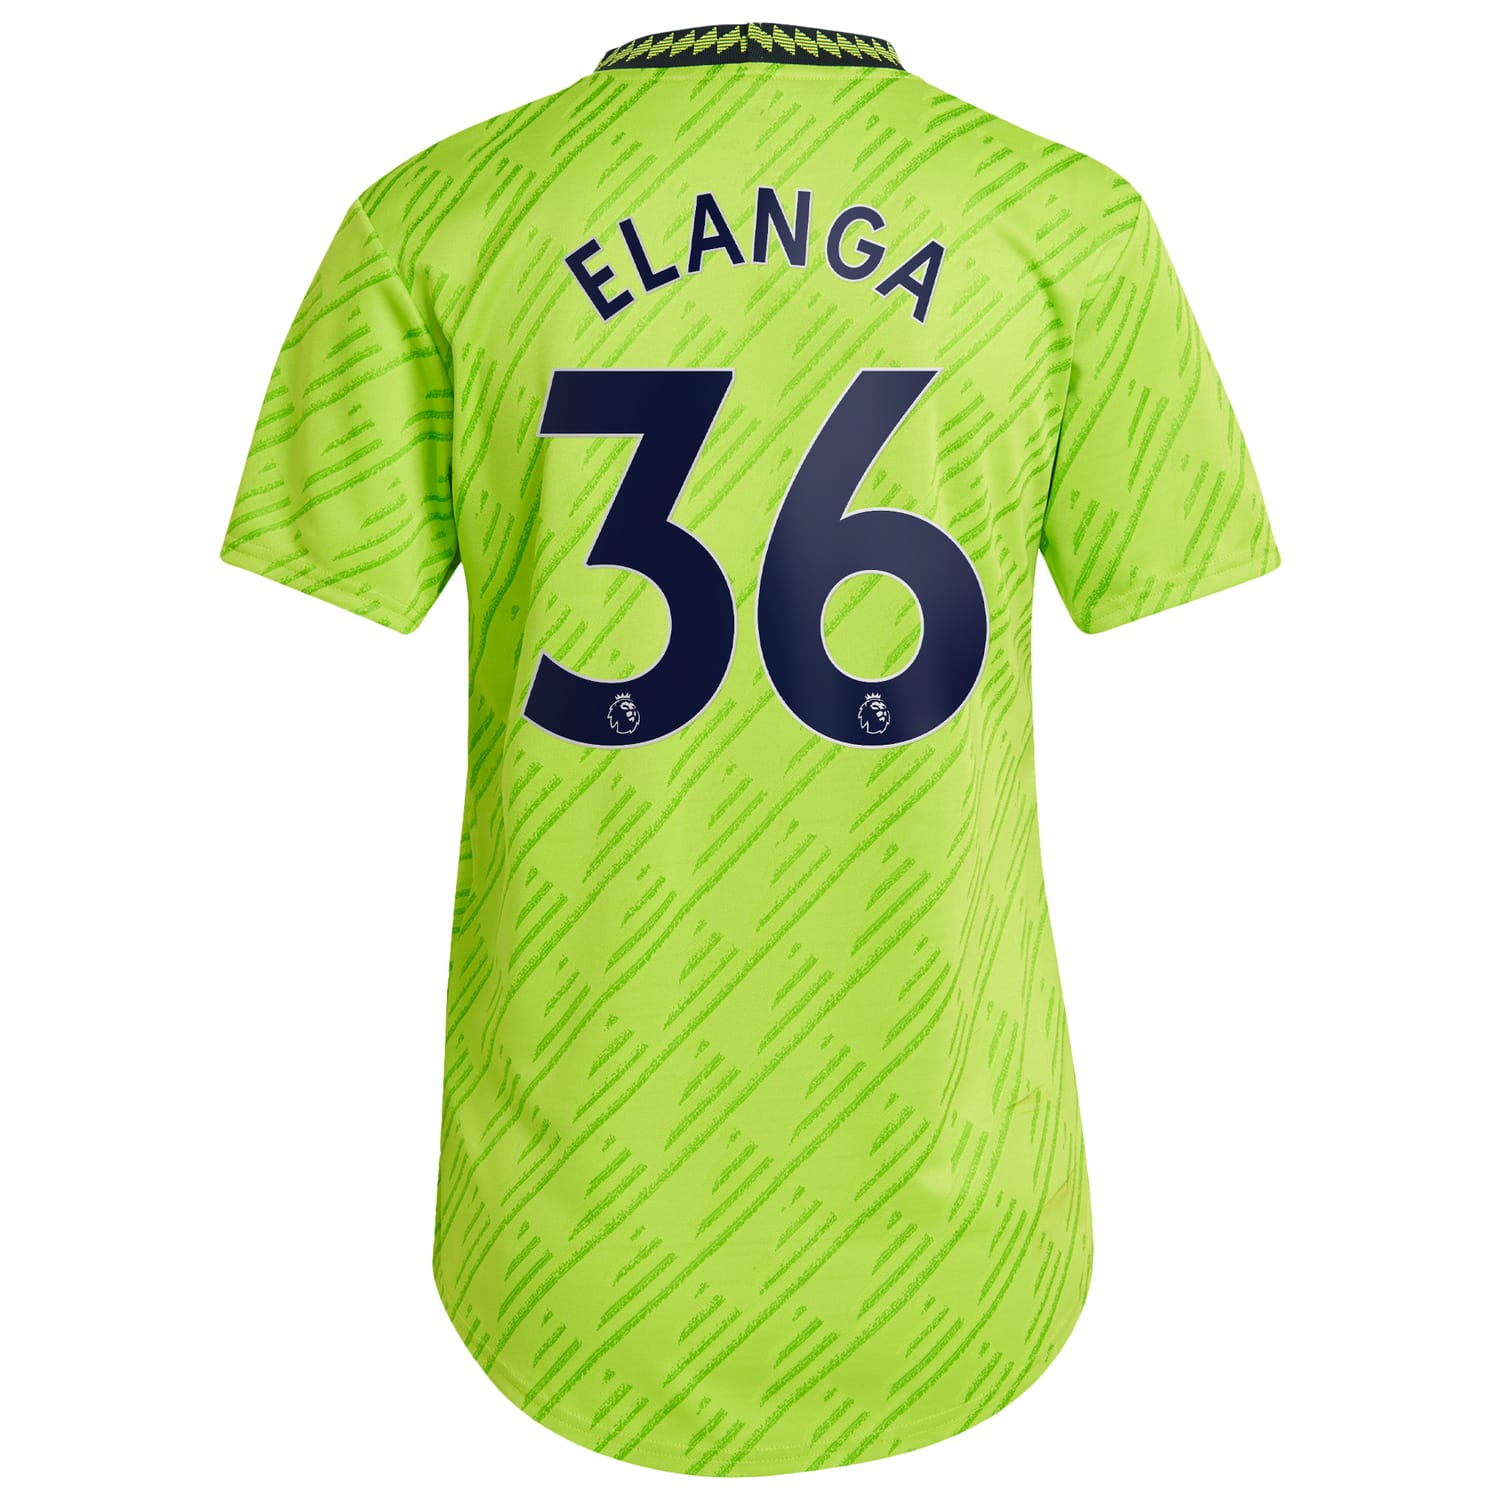 Premier League Manchester United Third Authentic Jersey Shirt 2022-23 player Anthony Elanga 36 printing for Women